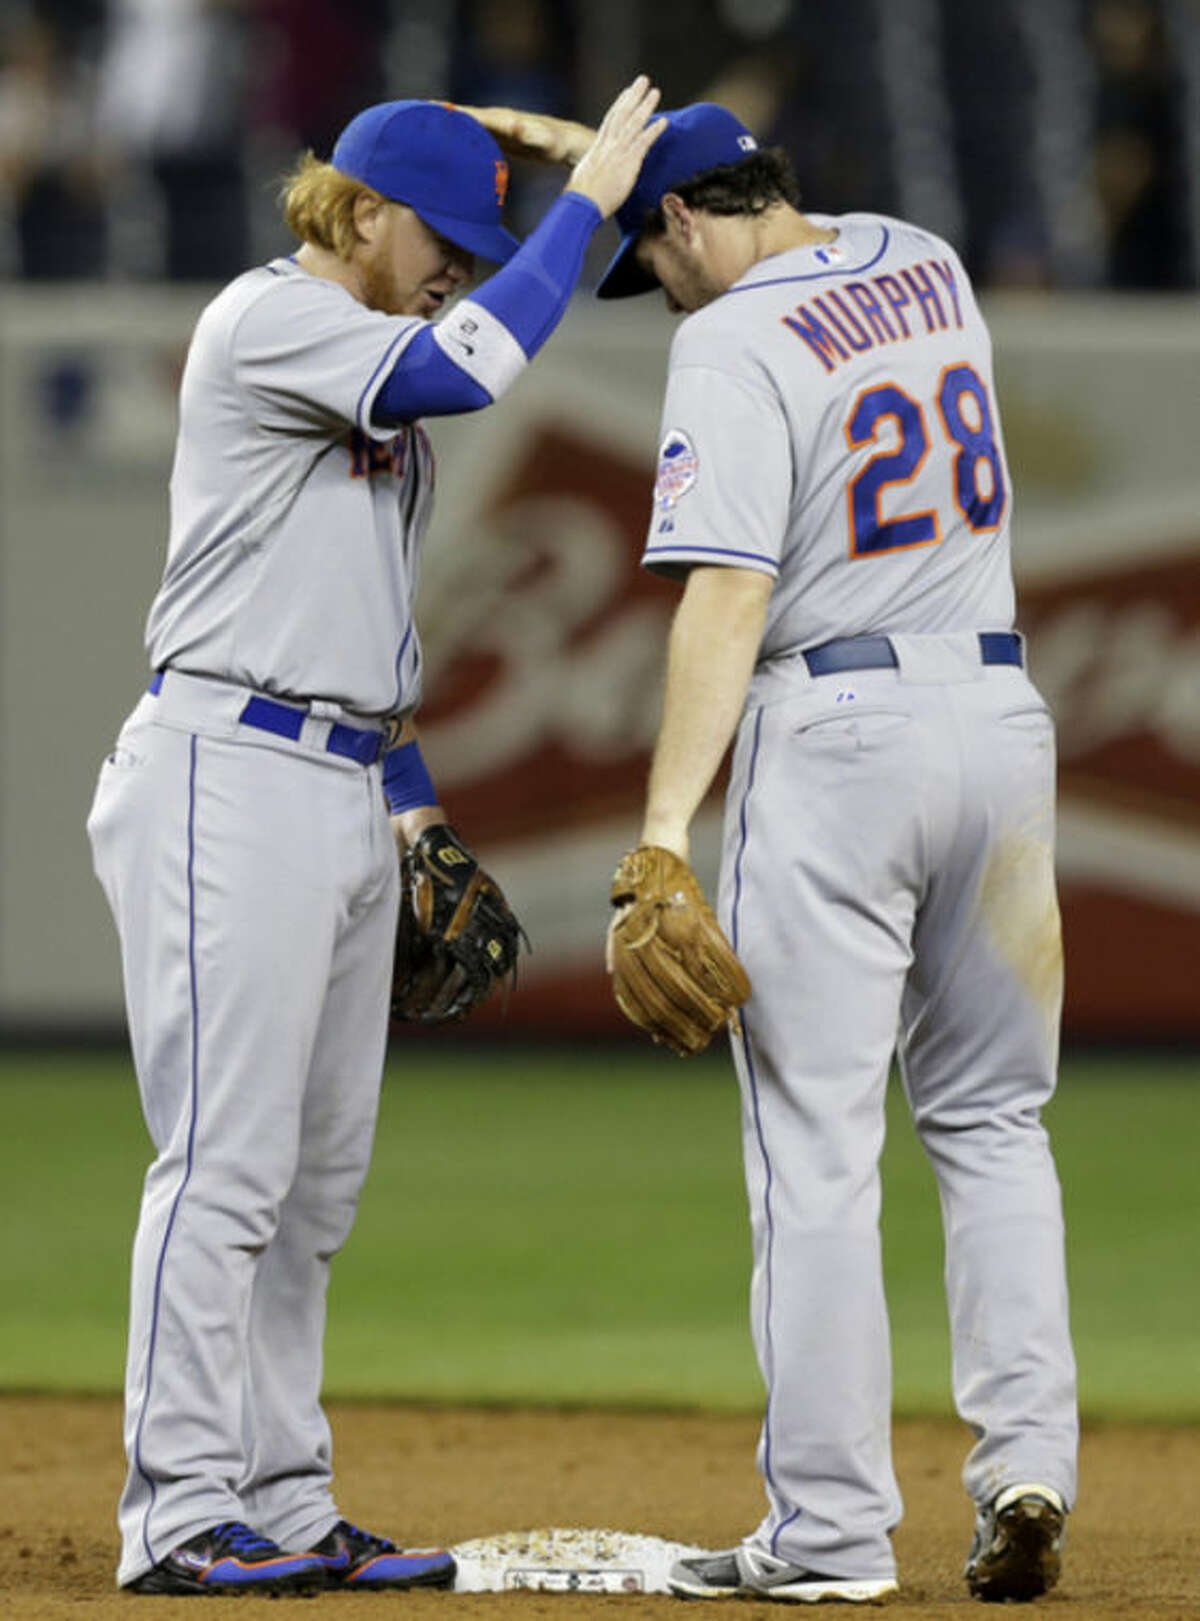 CORRECTS SCORE TO 9-4 NOT 9-3 - New York Mets second baseman Justin Turner (2) congratulates second baseman Daniel Murphy (28) after they defeated the New York Yankees 9-4 in an interleague baseball game at Yankee Stadium in New York, Wednesday, May 29, 2013. (AP Photo/Kathy Willens)